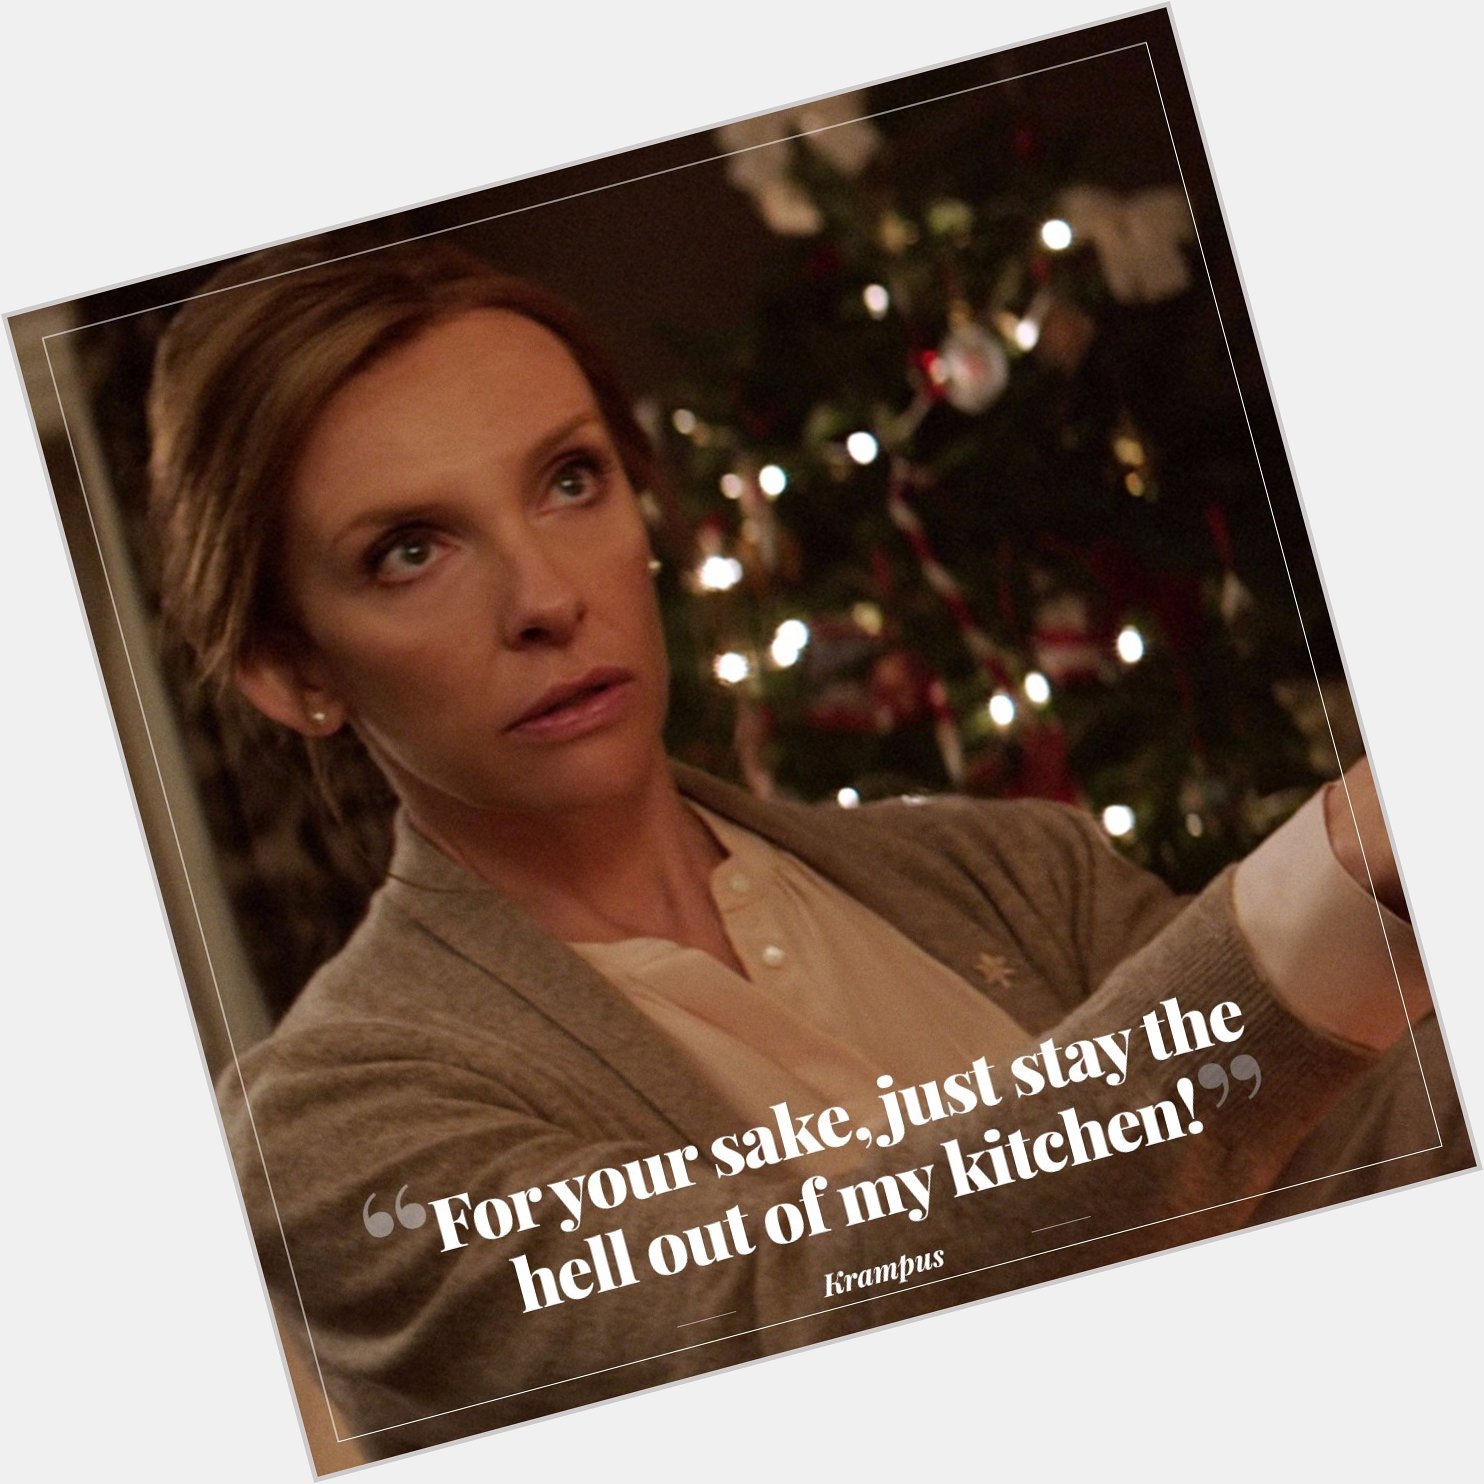 Happy birthday to Toni Collette from Krampus. 